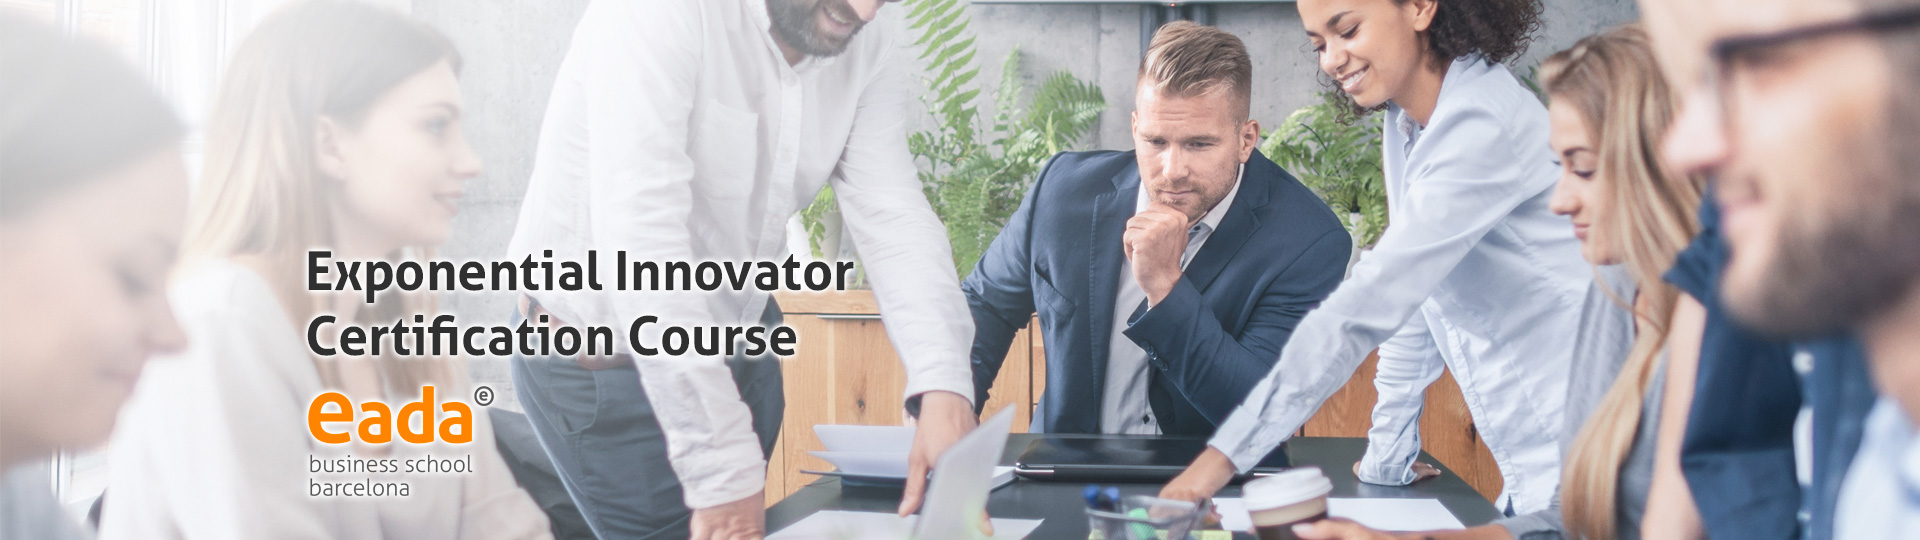 Exponential Innovator Certification Course